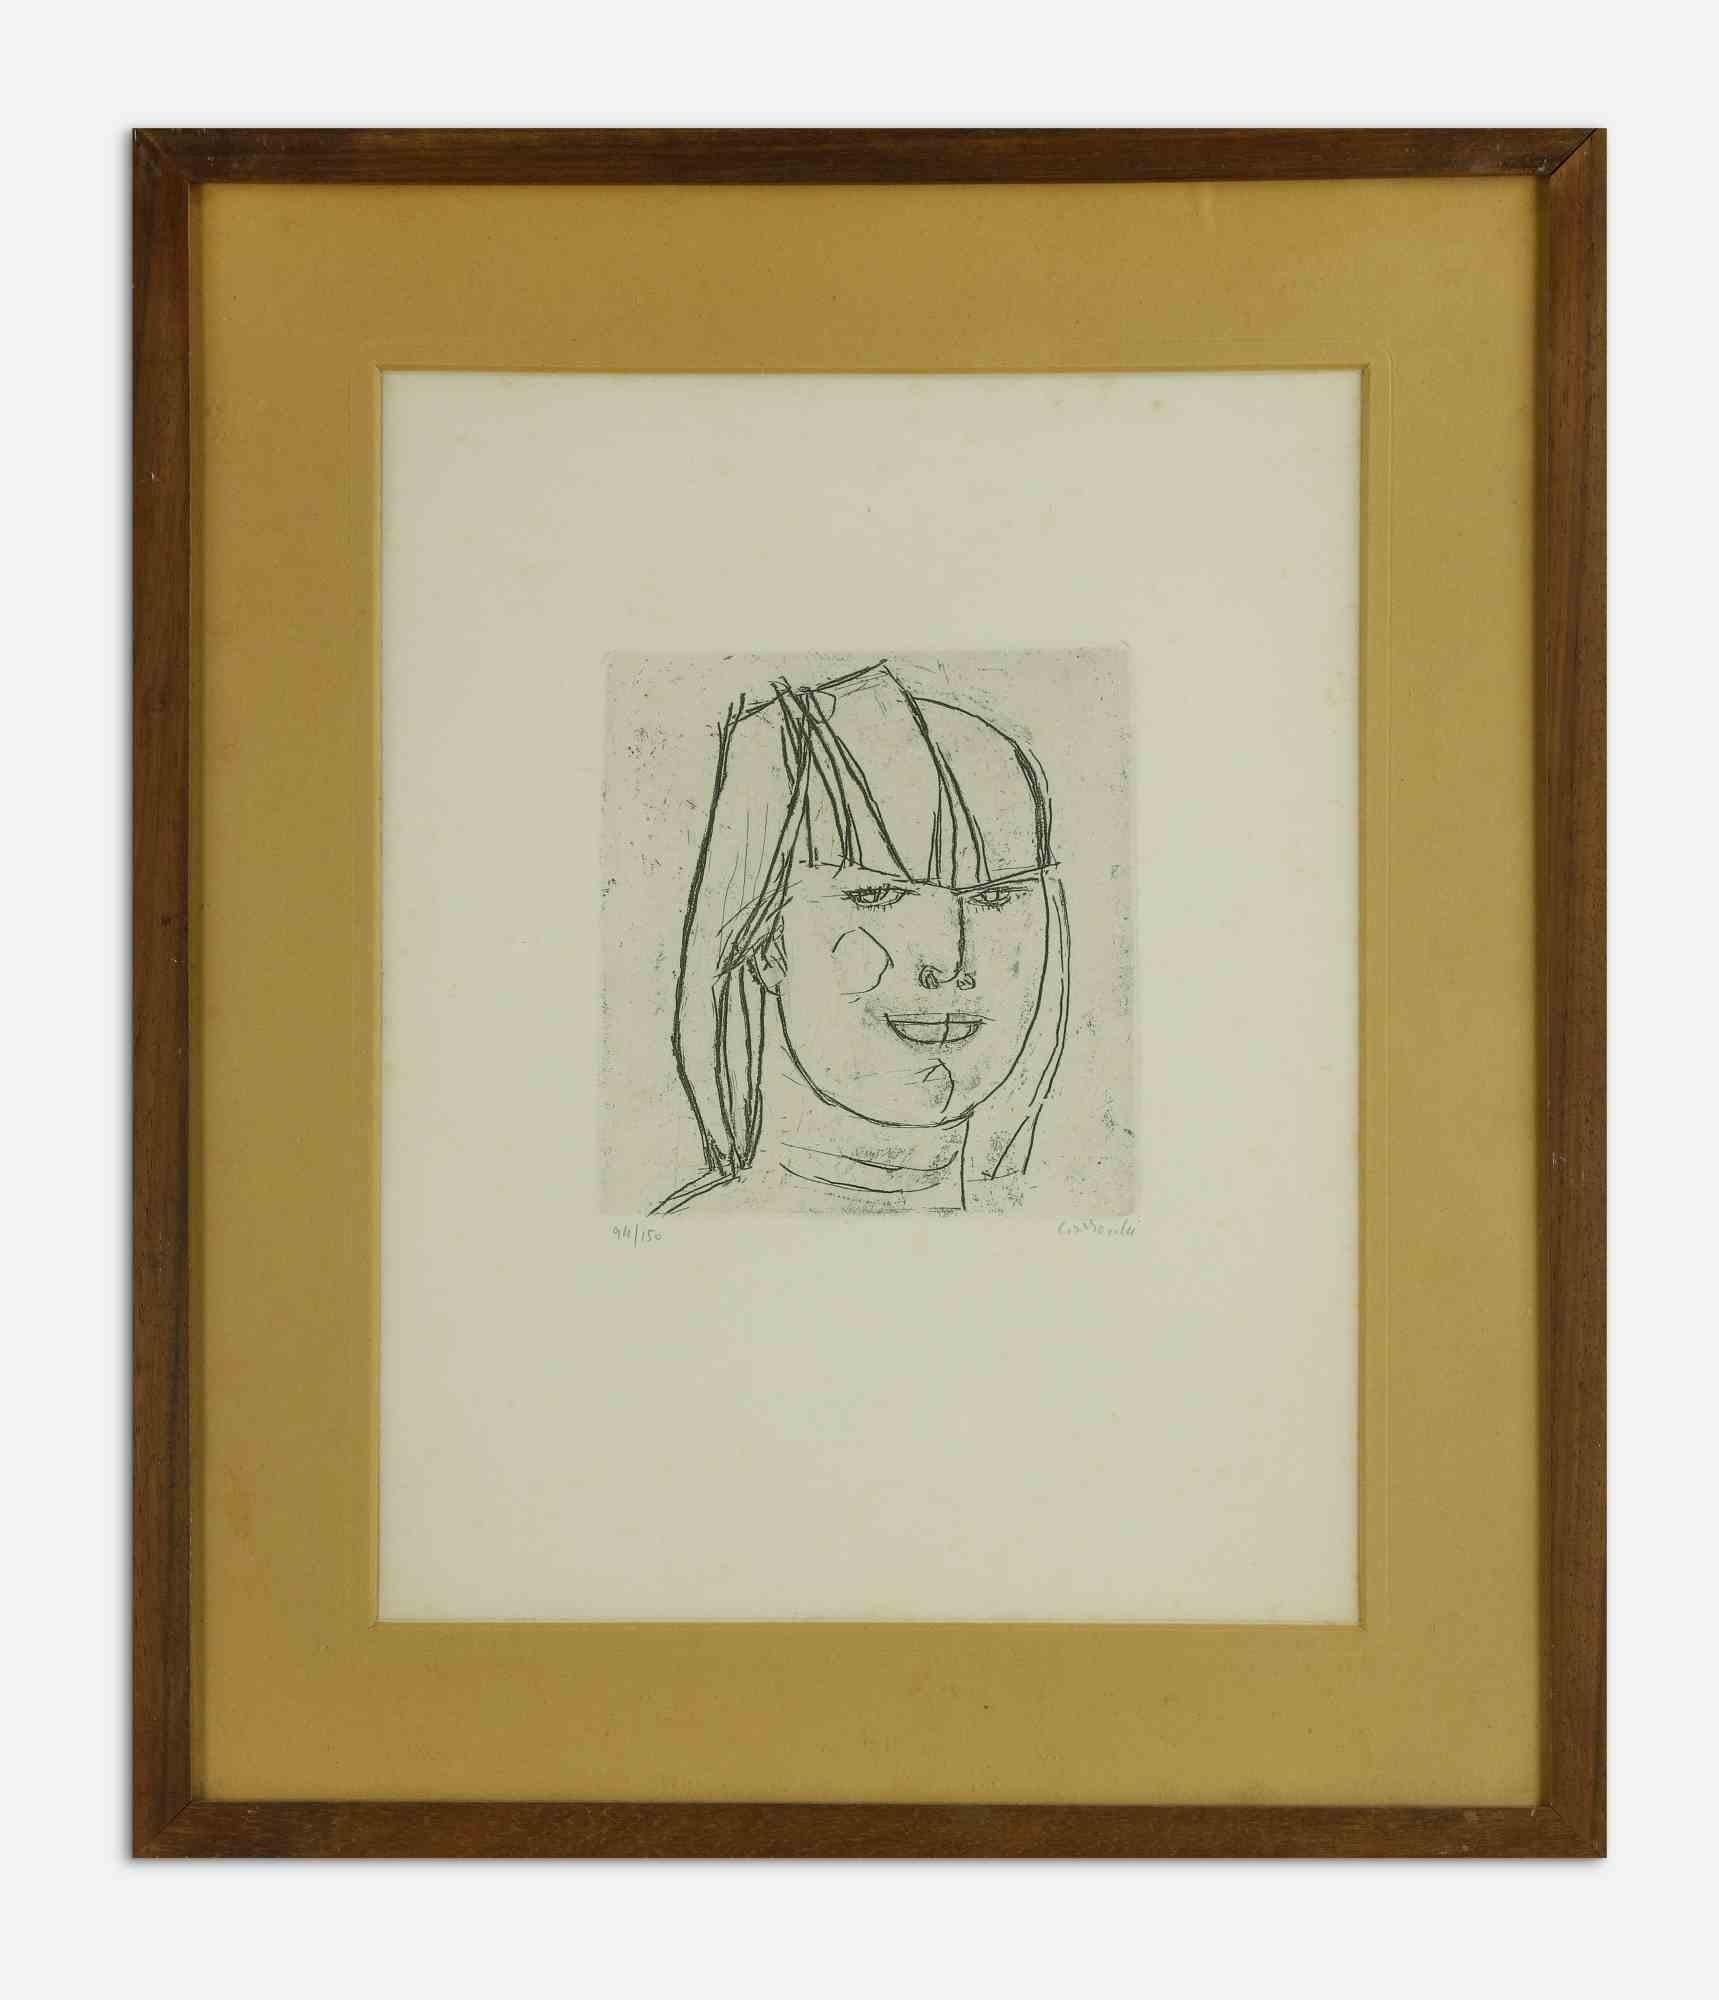 Child is an orginal modern artwork realized by Arnoldo Ciarrocchi in the mid-20th Century.

Black and white etching.

Hand signed and numbered on the lower margin

Edition of 94/150

Includes frame: 65 x 1.5 x 55 cm